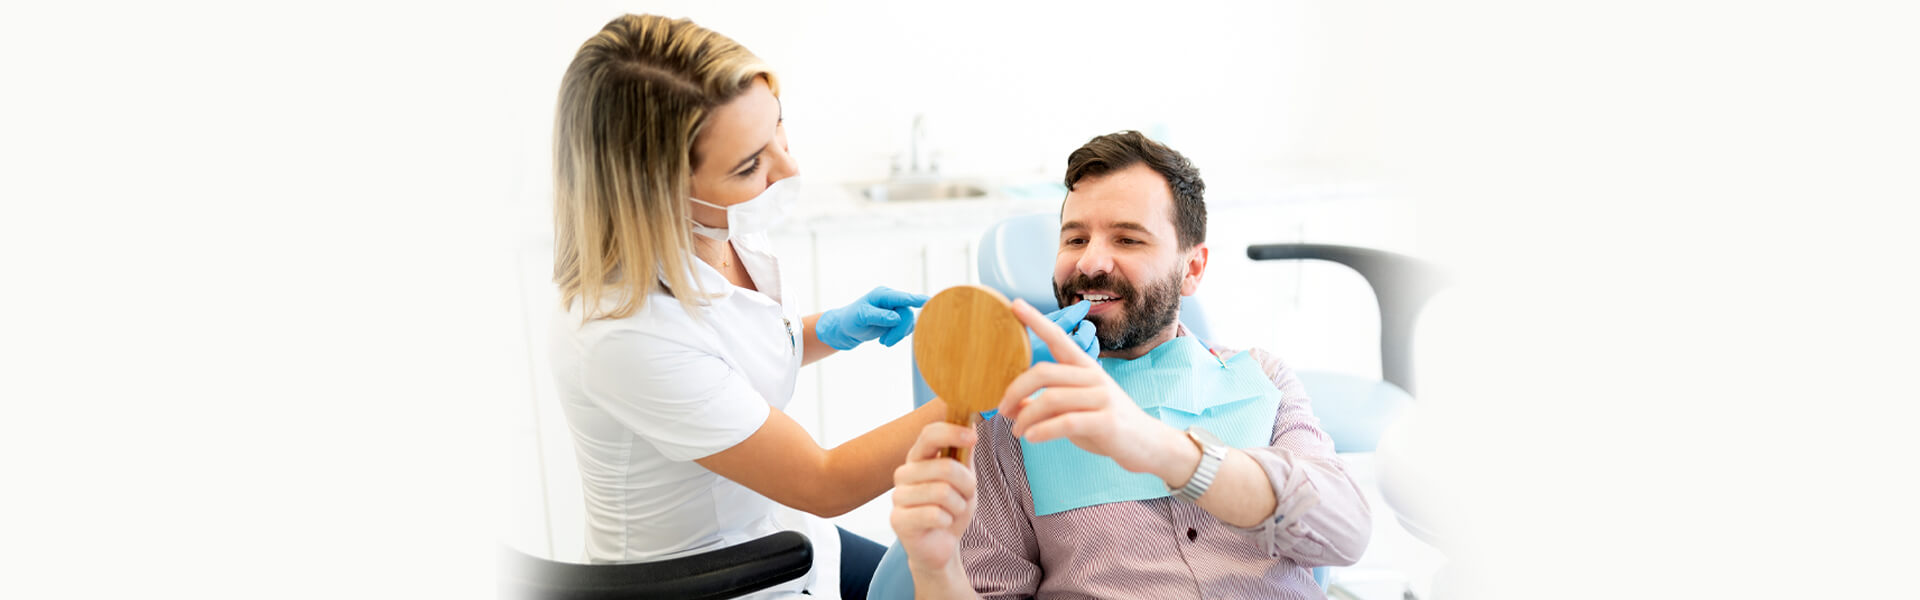 What Can You Expect during Routine Dental Exams and Cleanings?